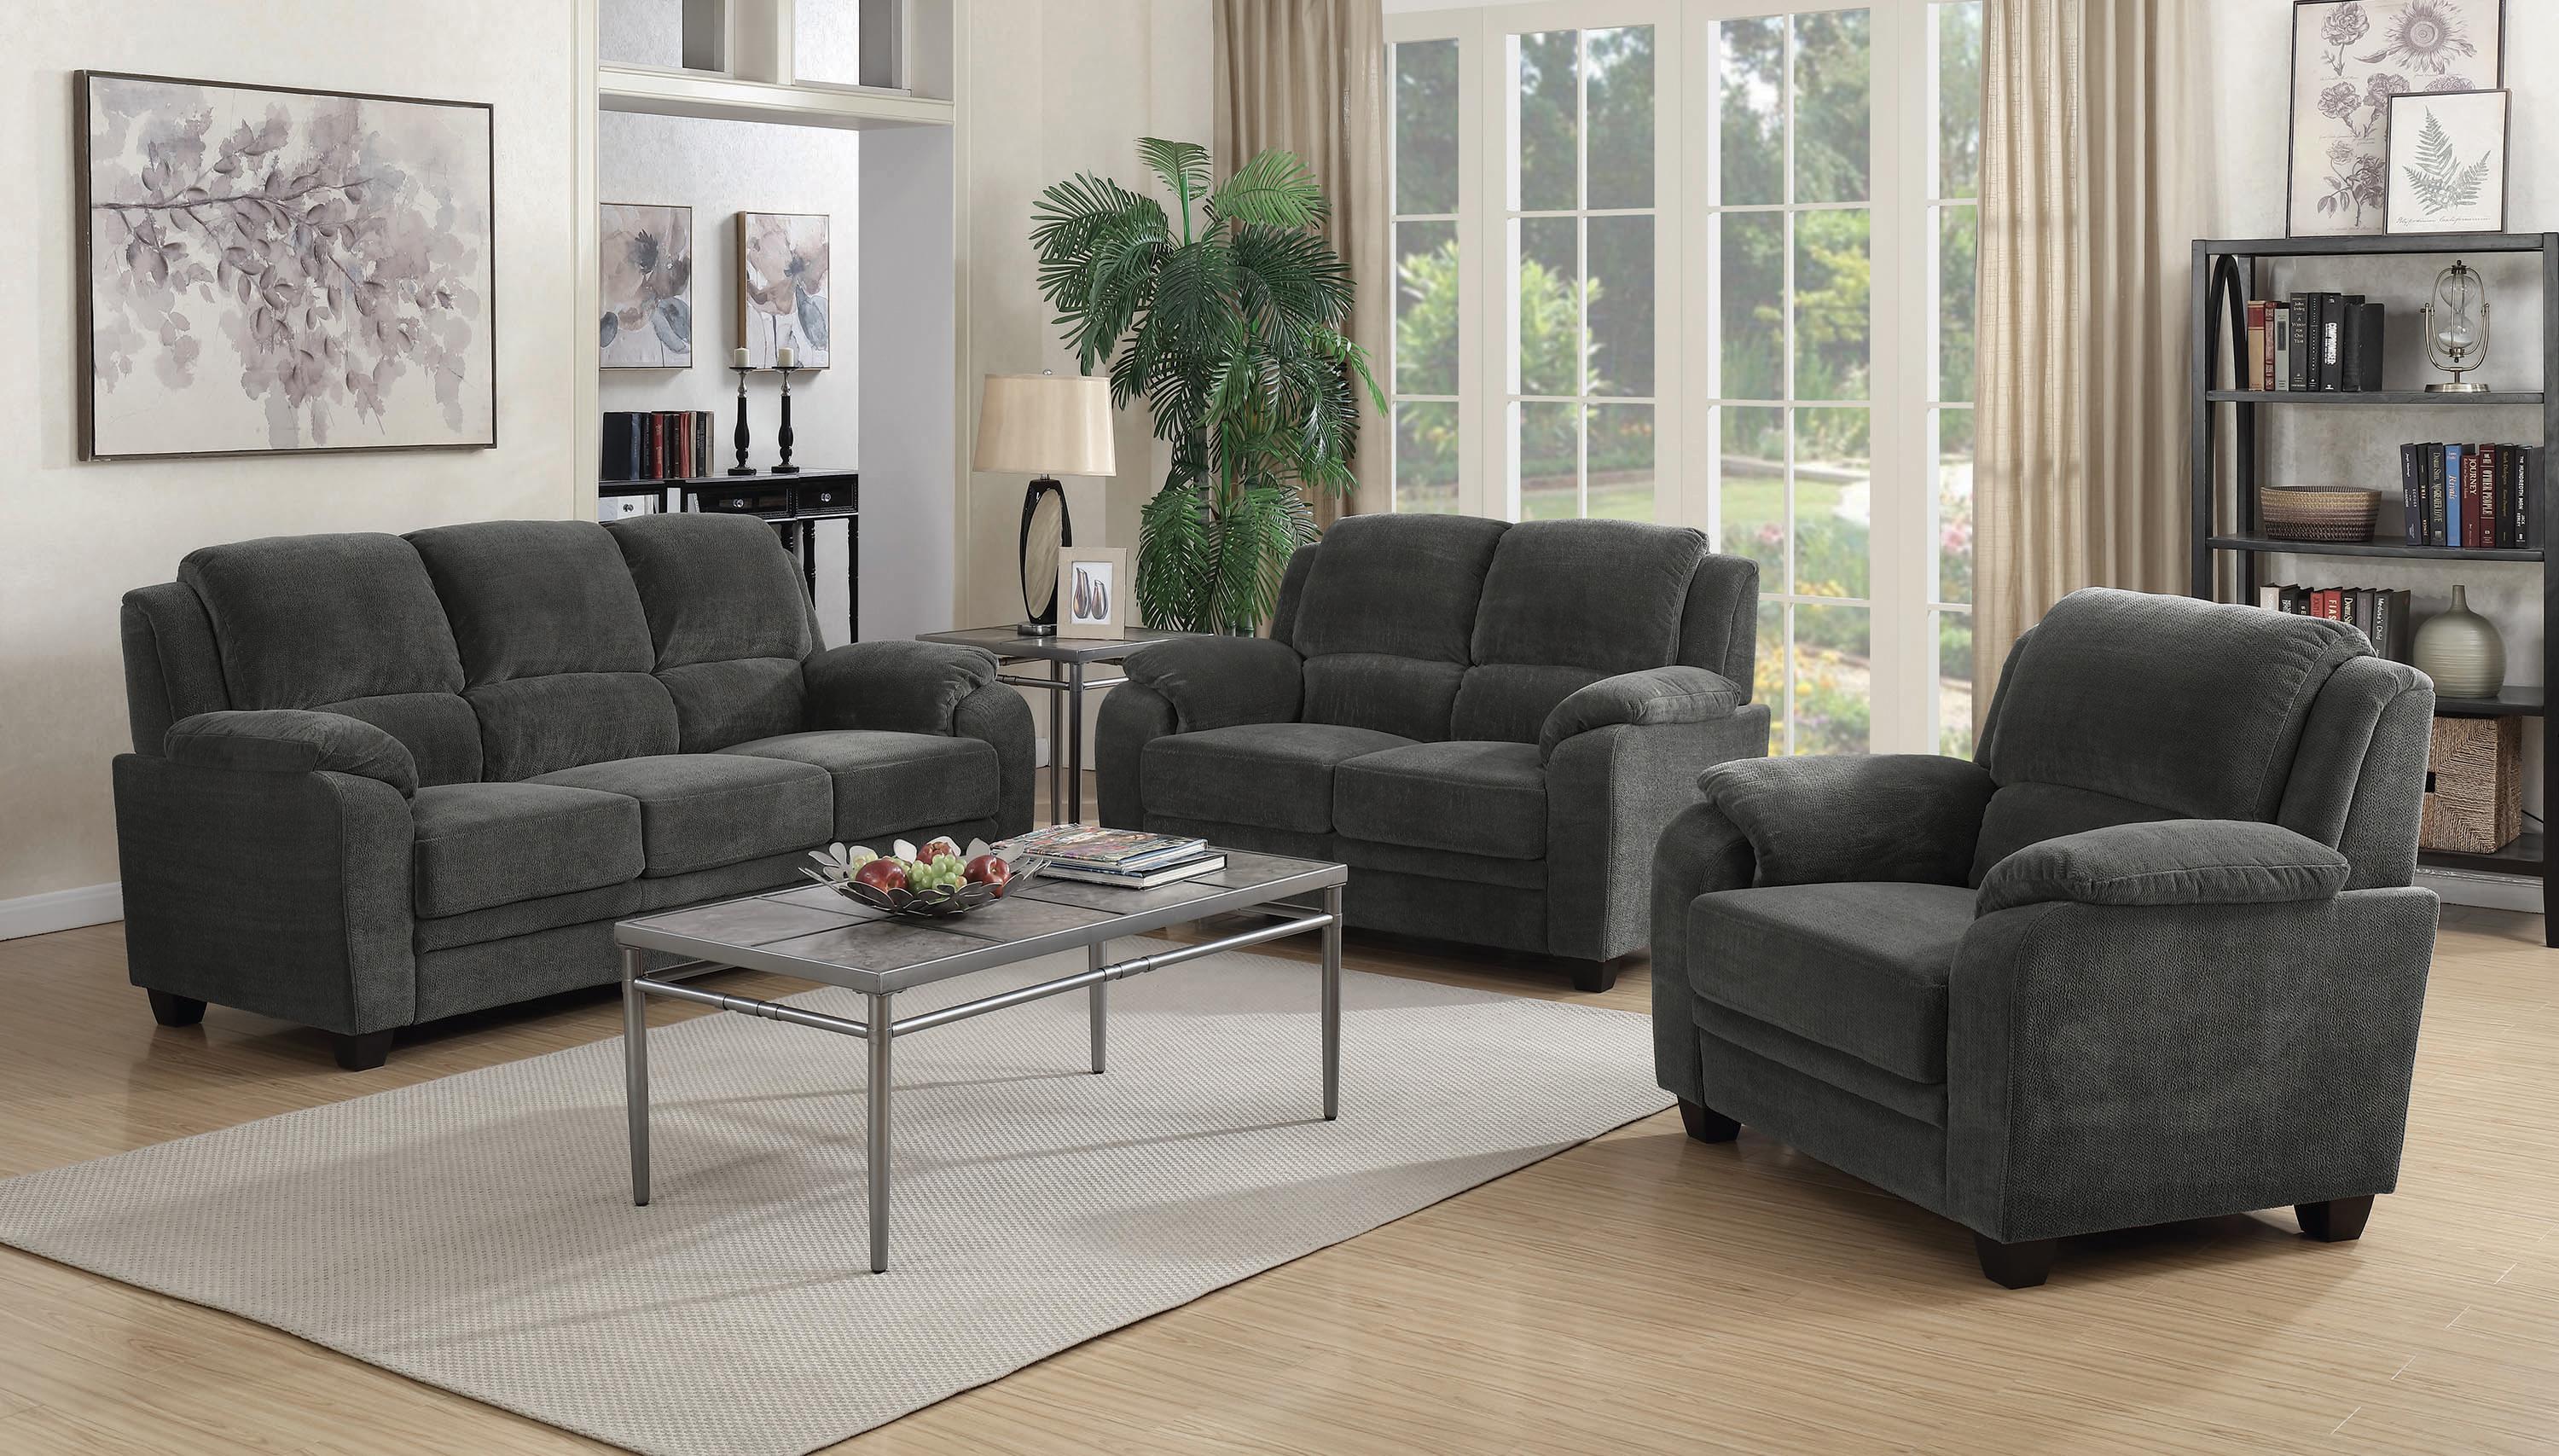 

    
Coaster 506242 Northend Loveseat Charcoal 506242
